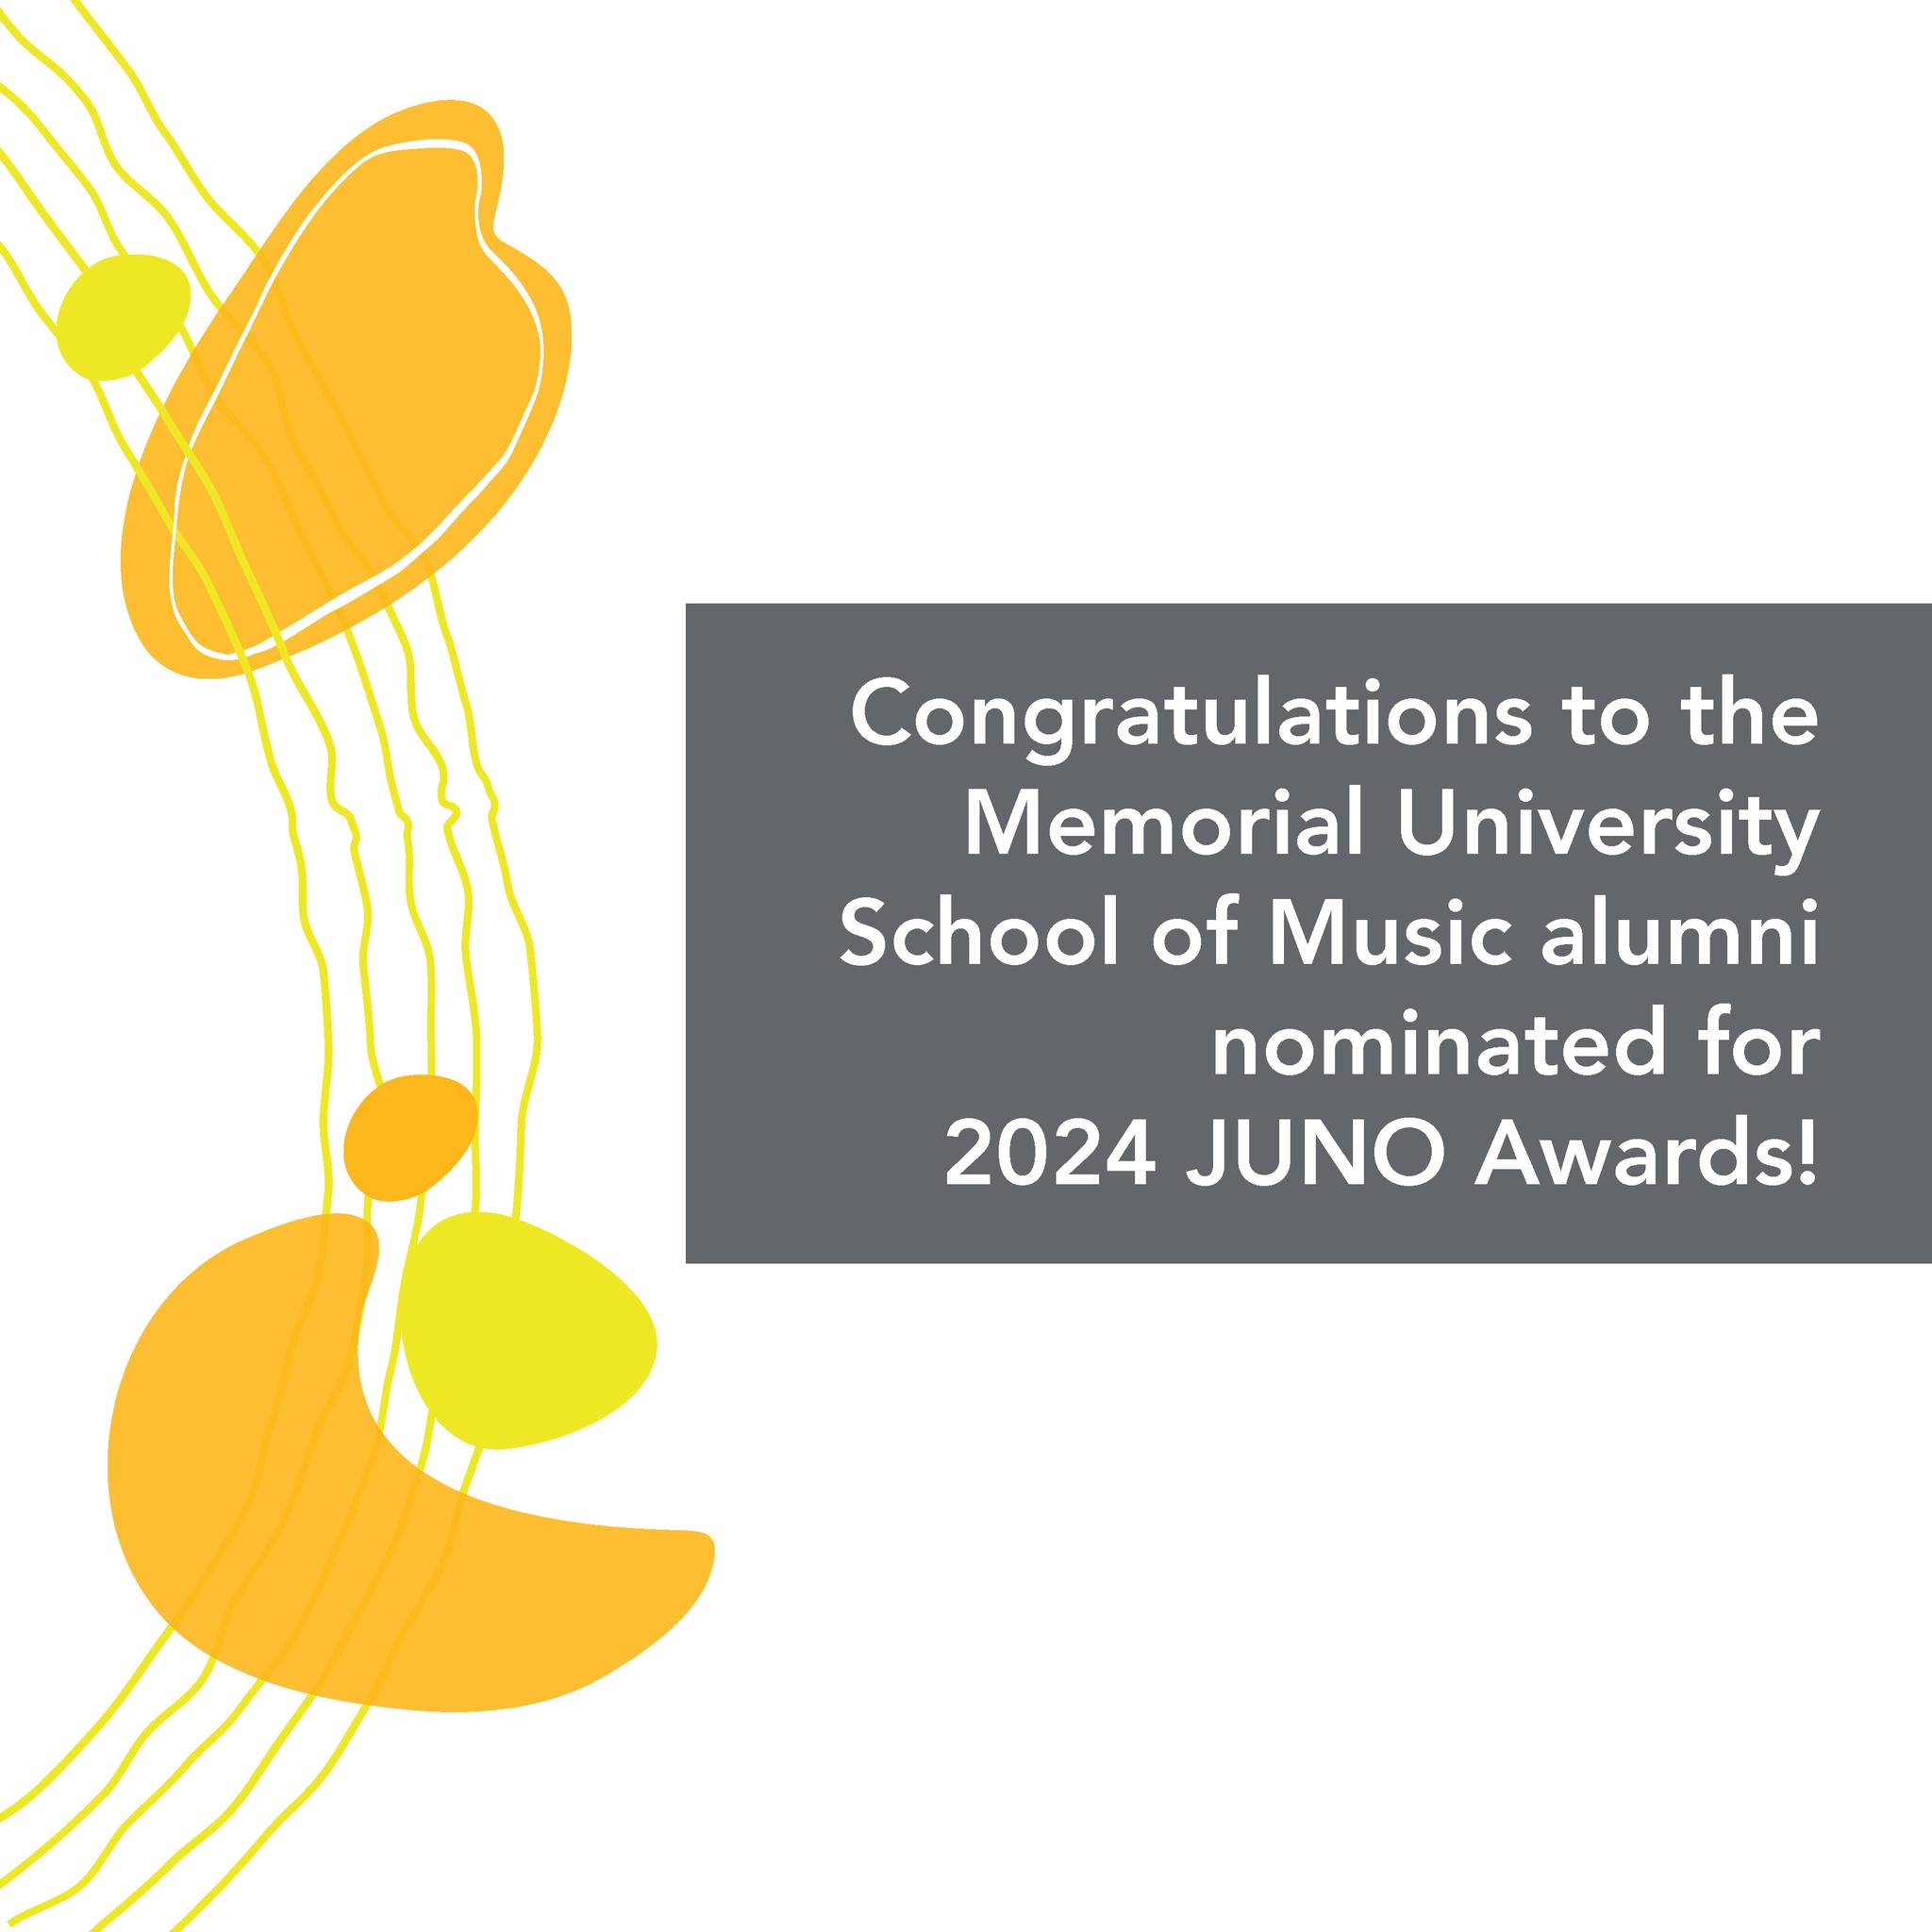 Congratulations to the School of Music Alumni who are nominated for 2024 JUNO Awards